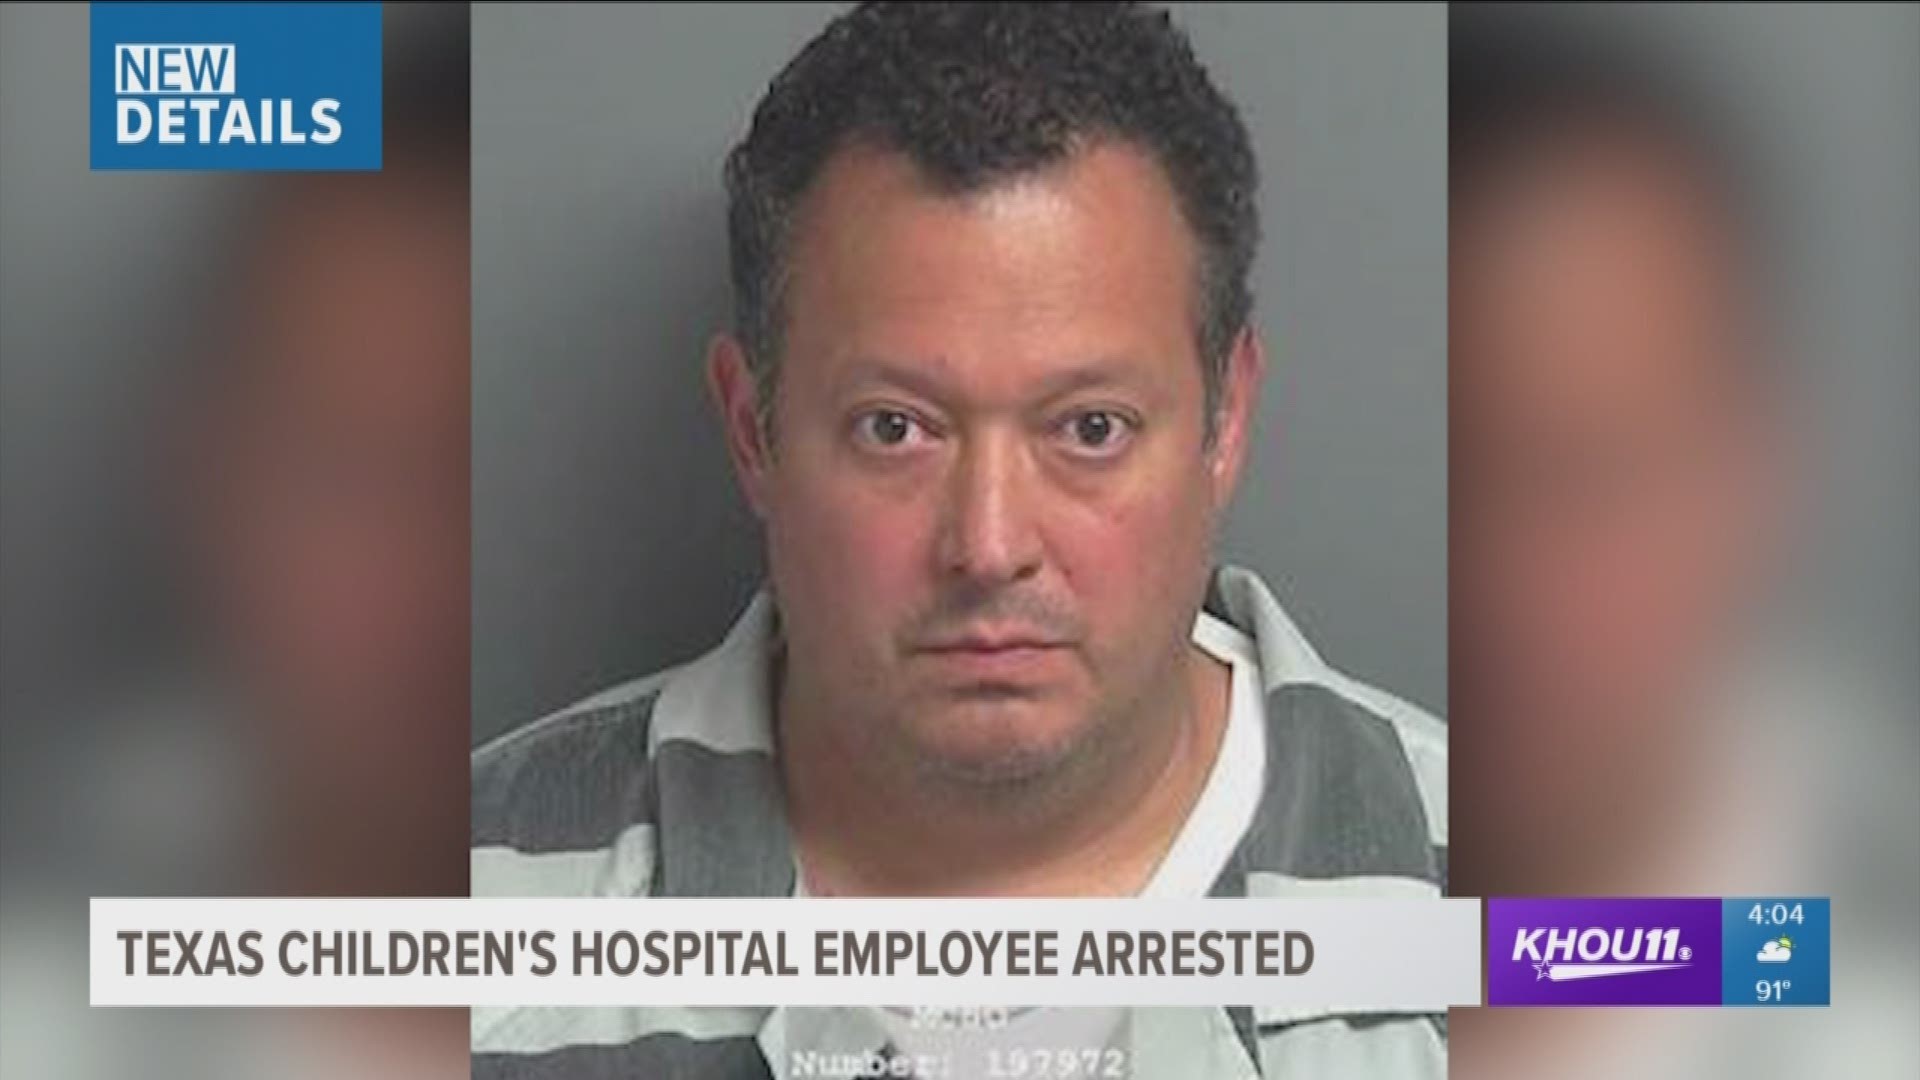 There's disturbing news about a former employee at Texas Children's Hospital. Carlos Carreon, 49, has been charged with possession of child pornography. Montgomery County Sheriff's deputies arrested him Thursday and he remains jailed on a $1,000,000 bond.